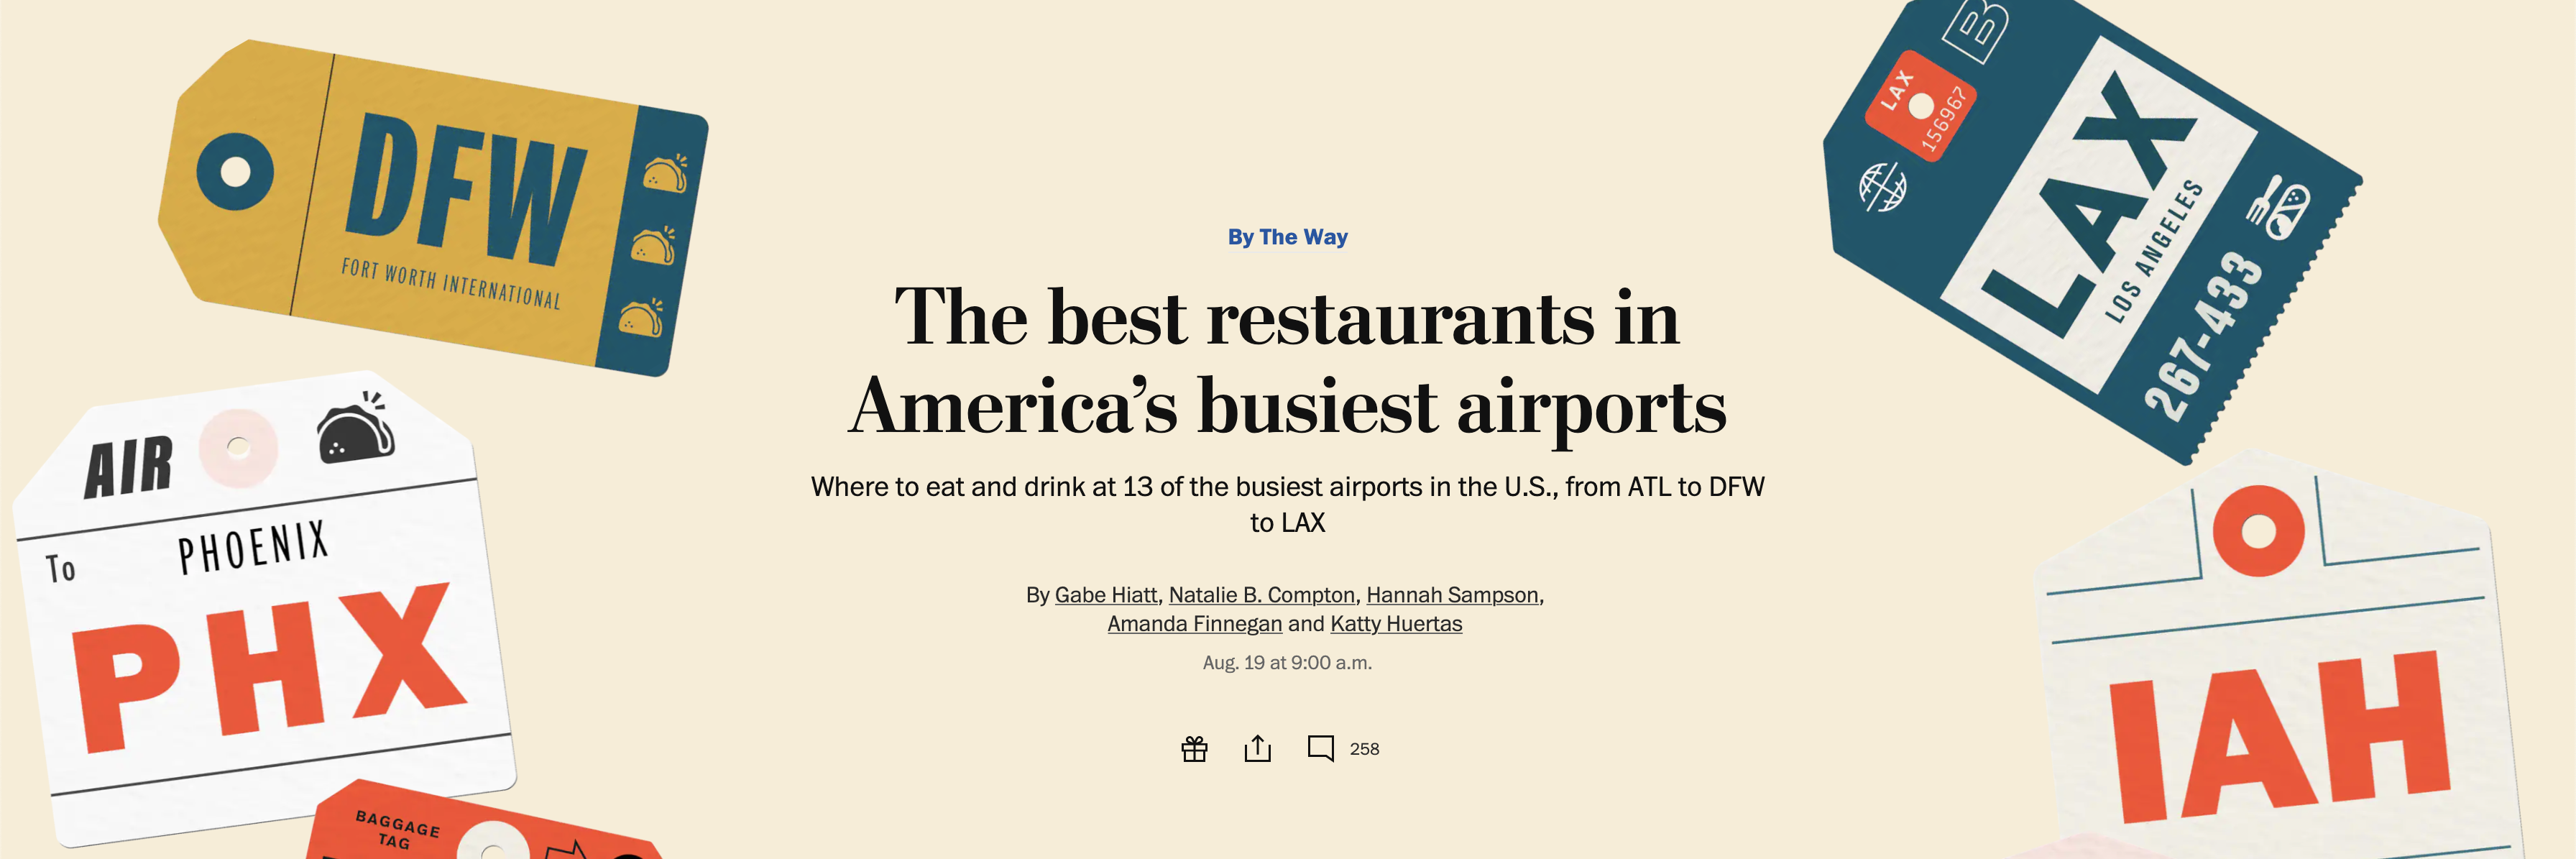 Text reads: The best restaurants in America’s busiest airports Where to eat and drink at 13 of the busiest airports in the U.S., from ATL to DFW to LAX By Gabe Hiatt, Natalie B. Compton, Hannah Sampson, Amanda Finnegan and Katty Huertas